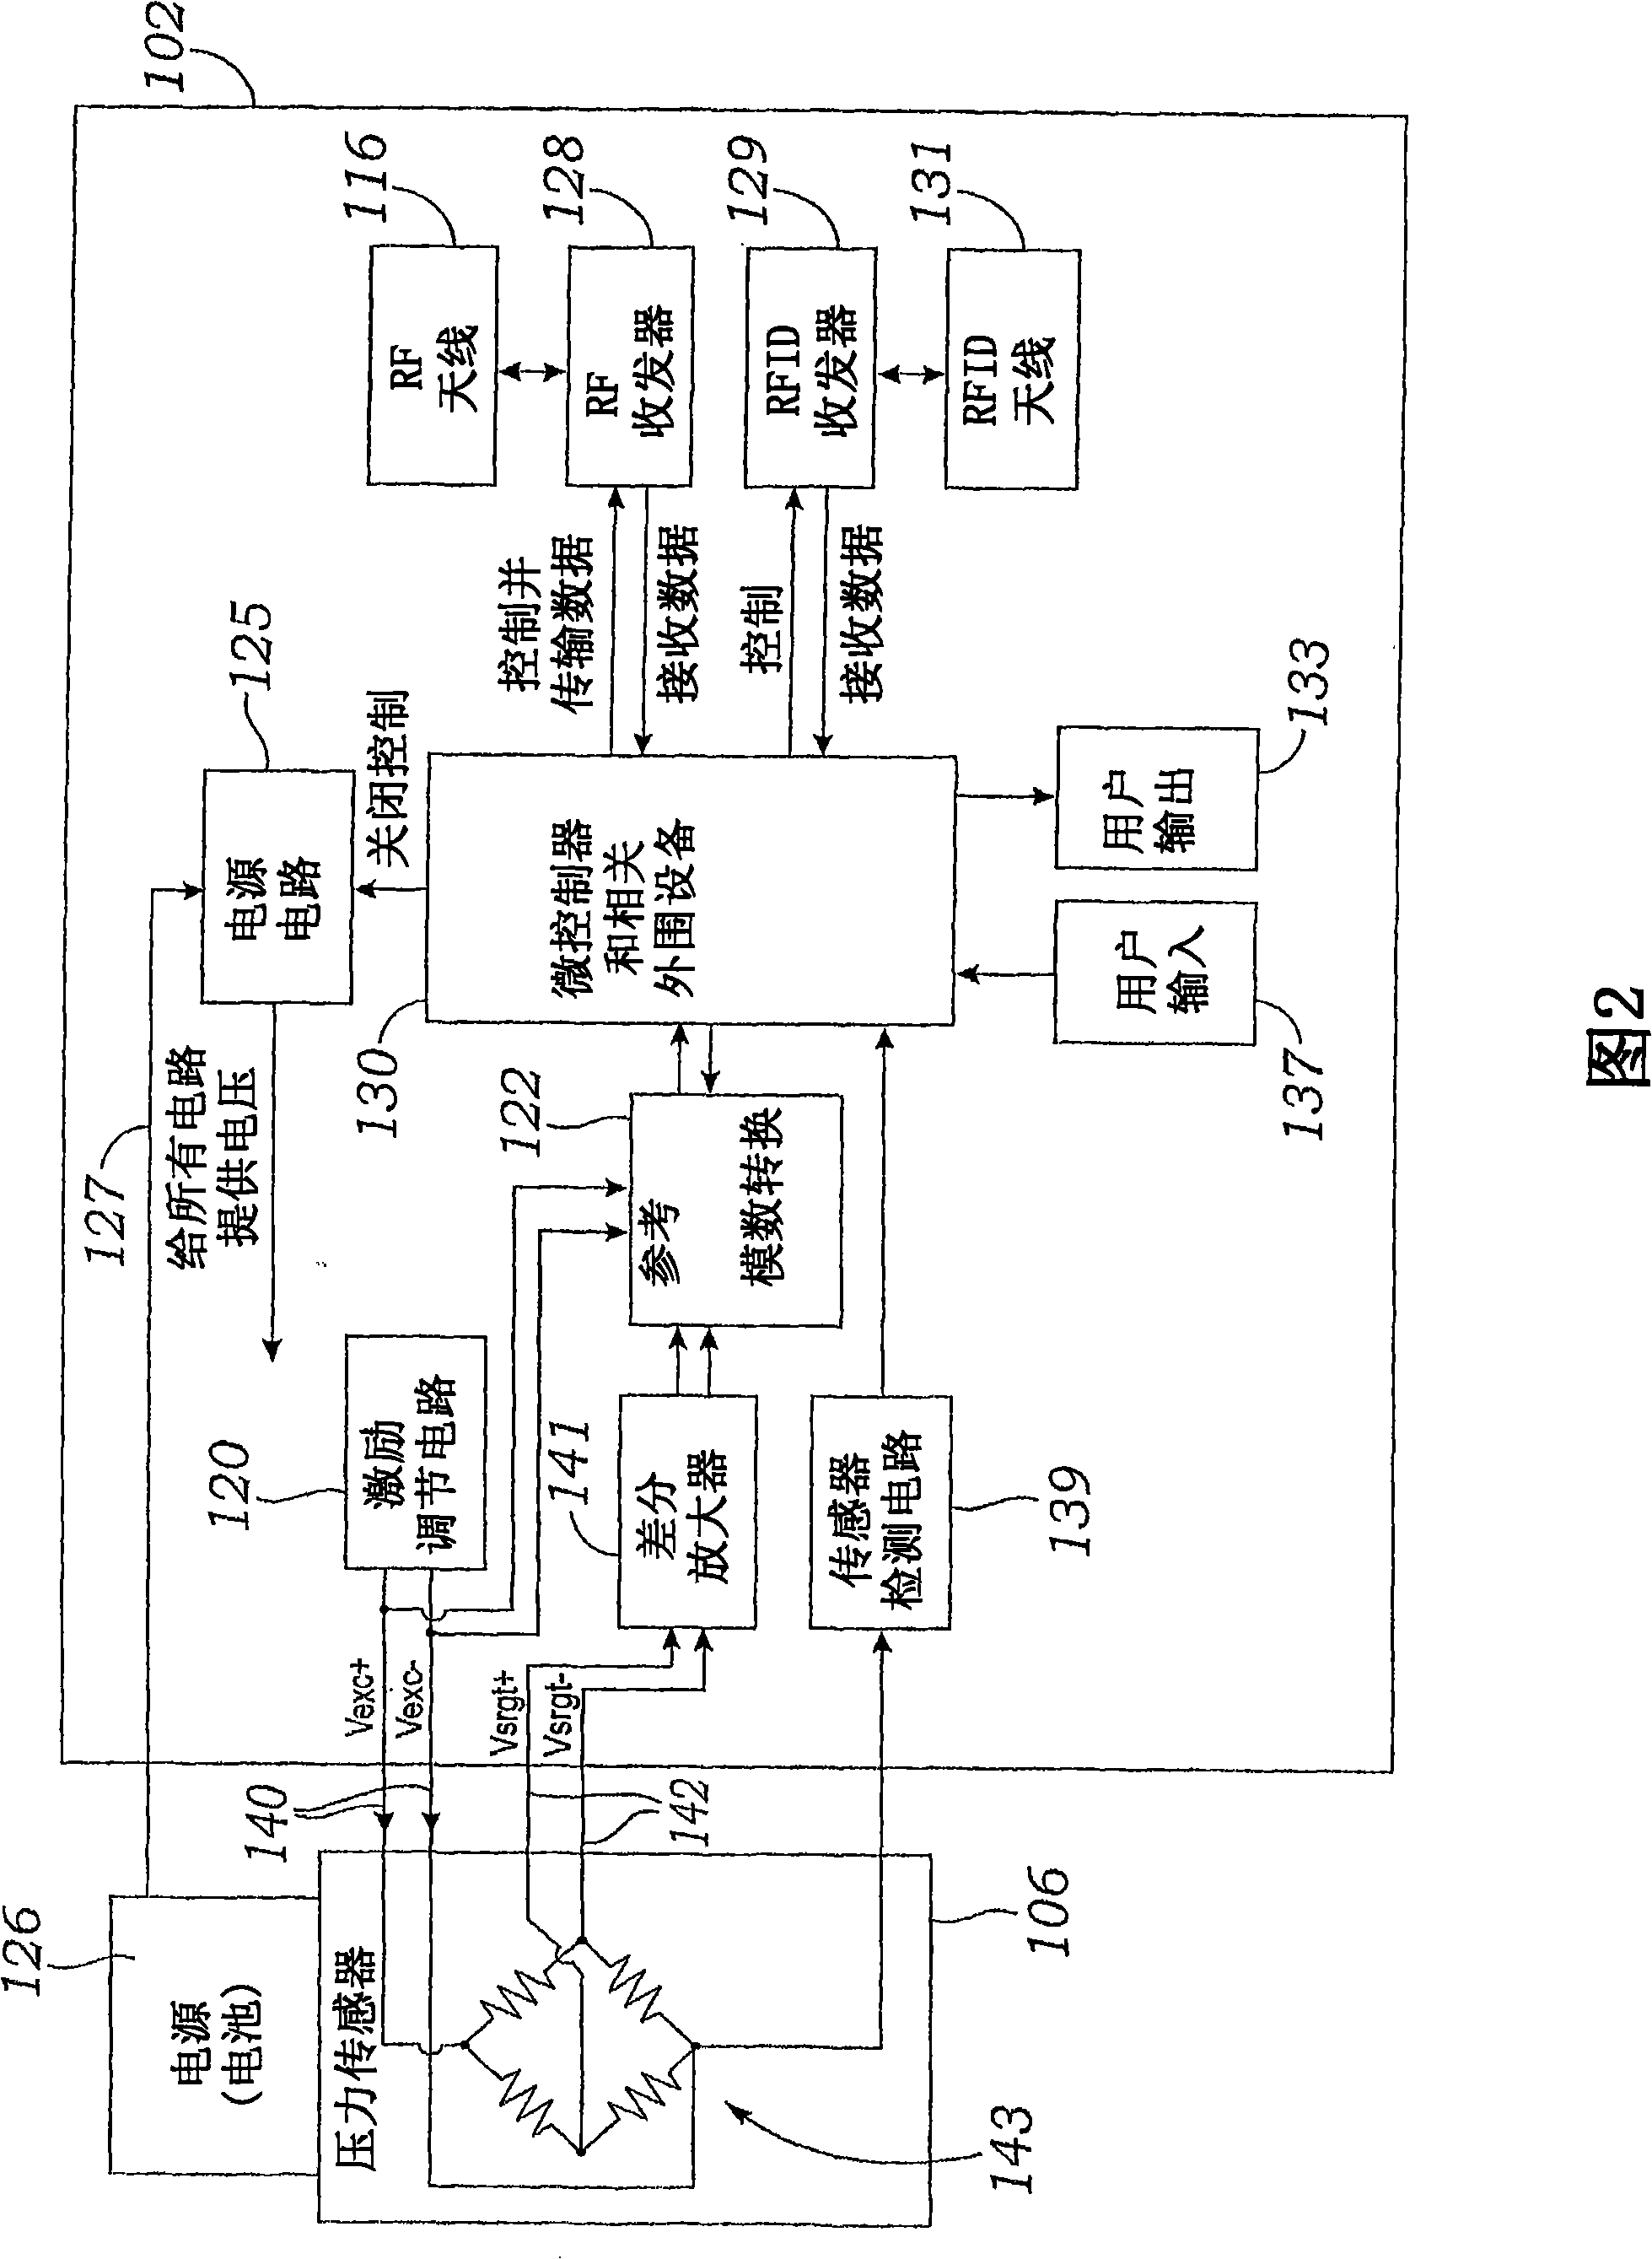 Wireless communication system for pressure monitoring